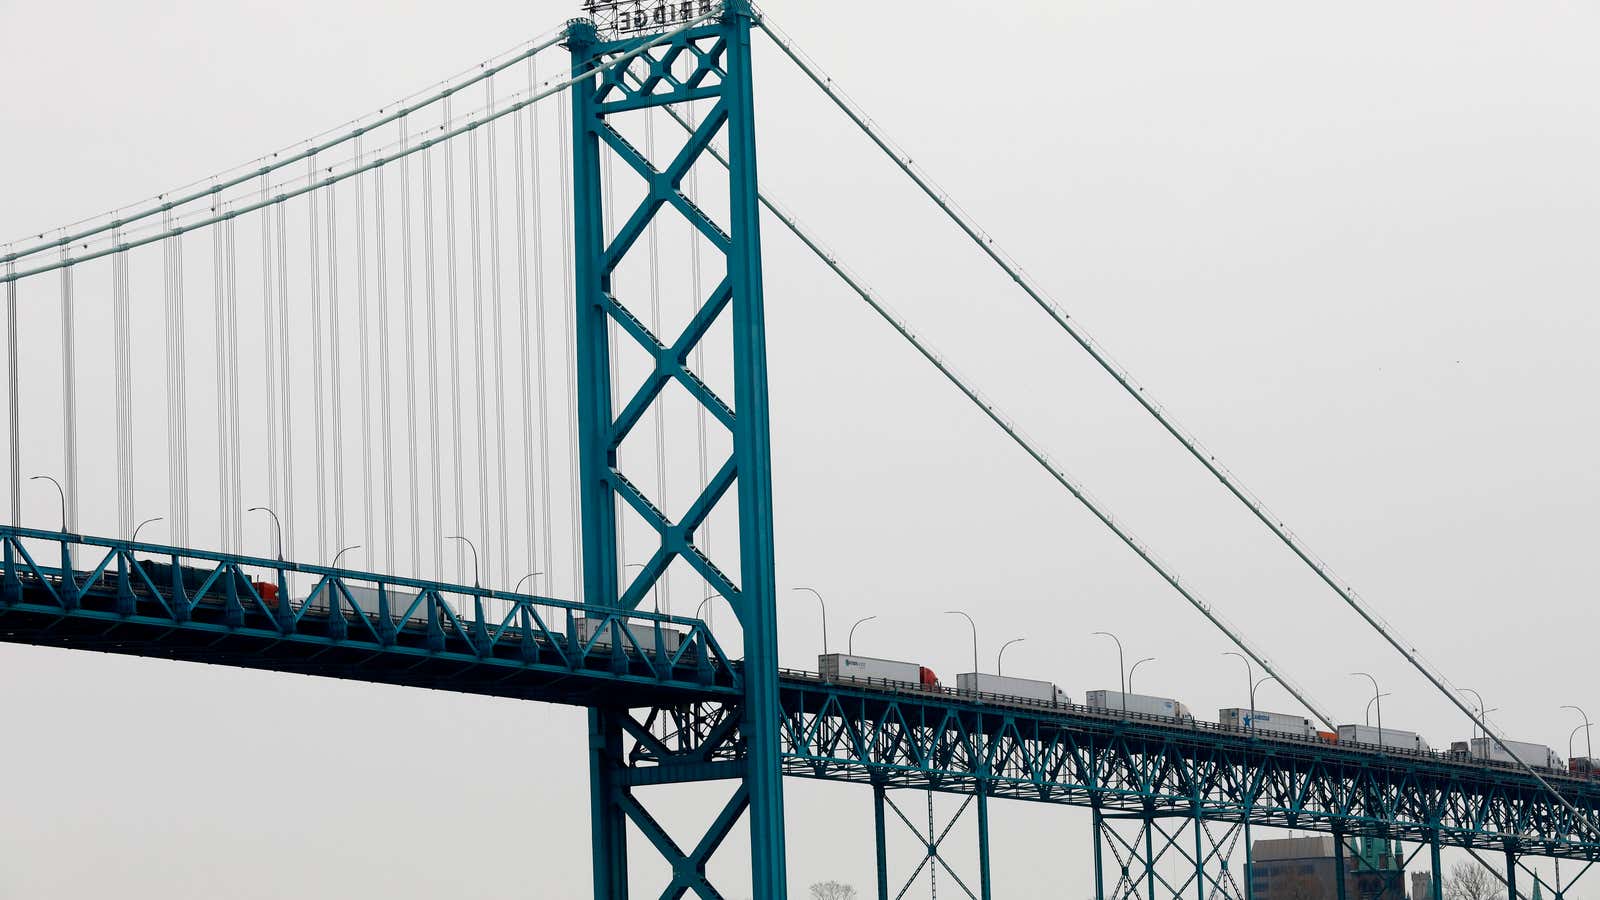 General view of the Ambassador Bridge that connects Detroit and Windsor, Canada on March 18, 2020 in Detroit, Michigan. The U.S. and Canada have agreed to temporarily restrict all nonessential travel across the border after the World Health Organization (WHO) declared coronavirus (COVID-19) a pandemic